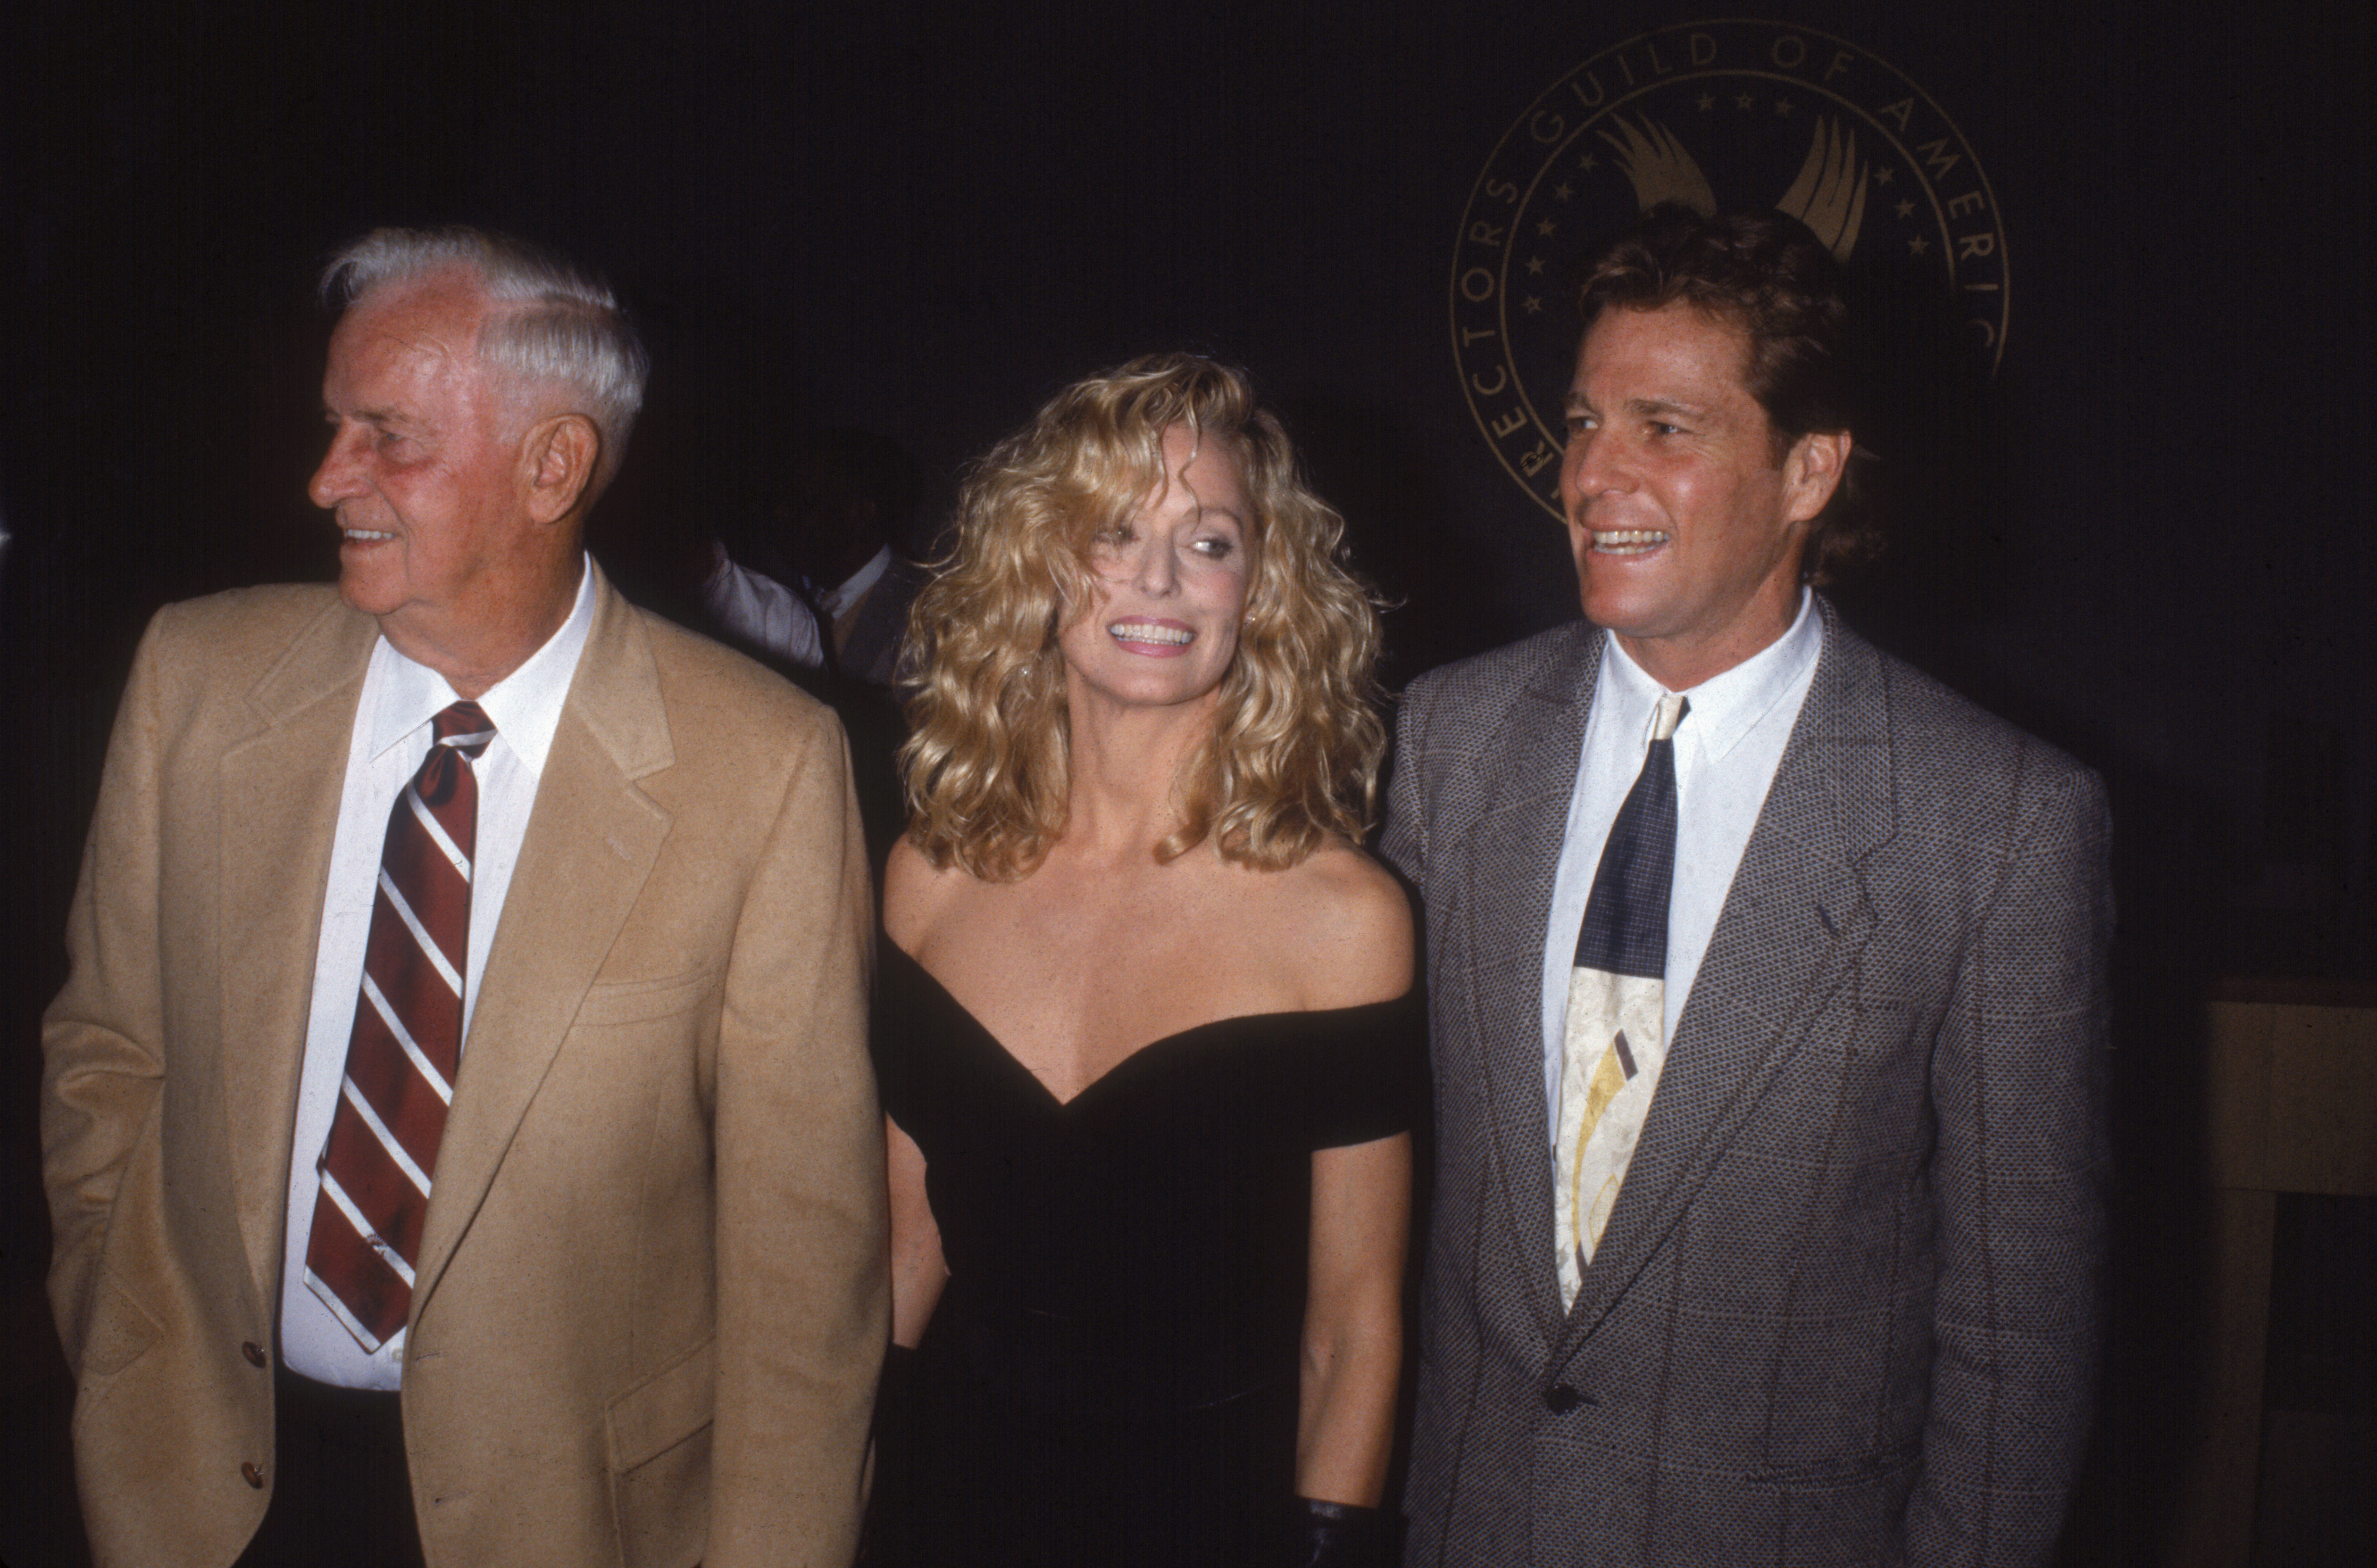 James Fawcett, Farrah Fawcett, and Ryan O'Neal at the premiere of "Cry Freedom" to benefit UNICEF in Universal City, California, on November 5, 1987 | Source: Getty Images